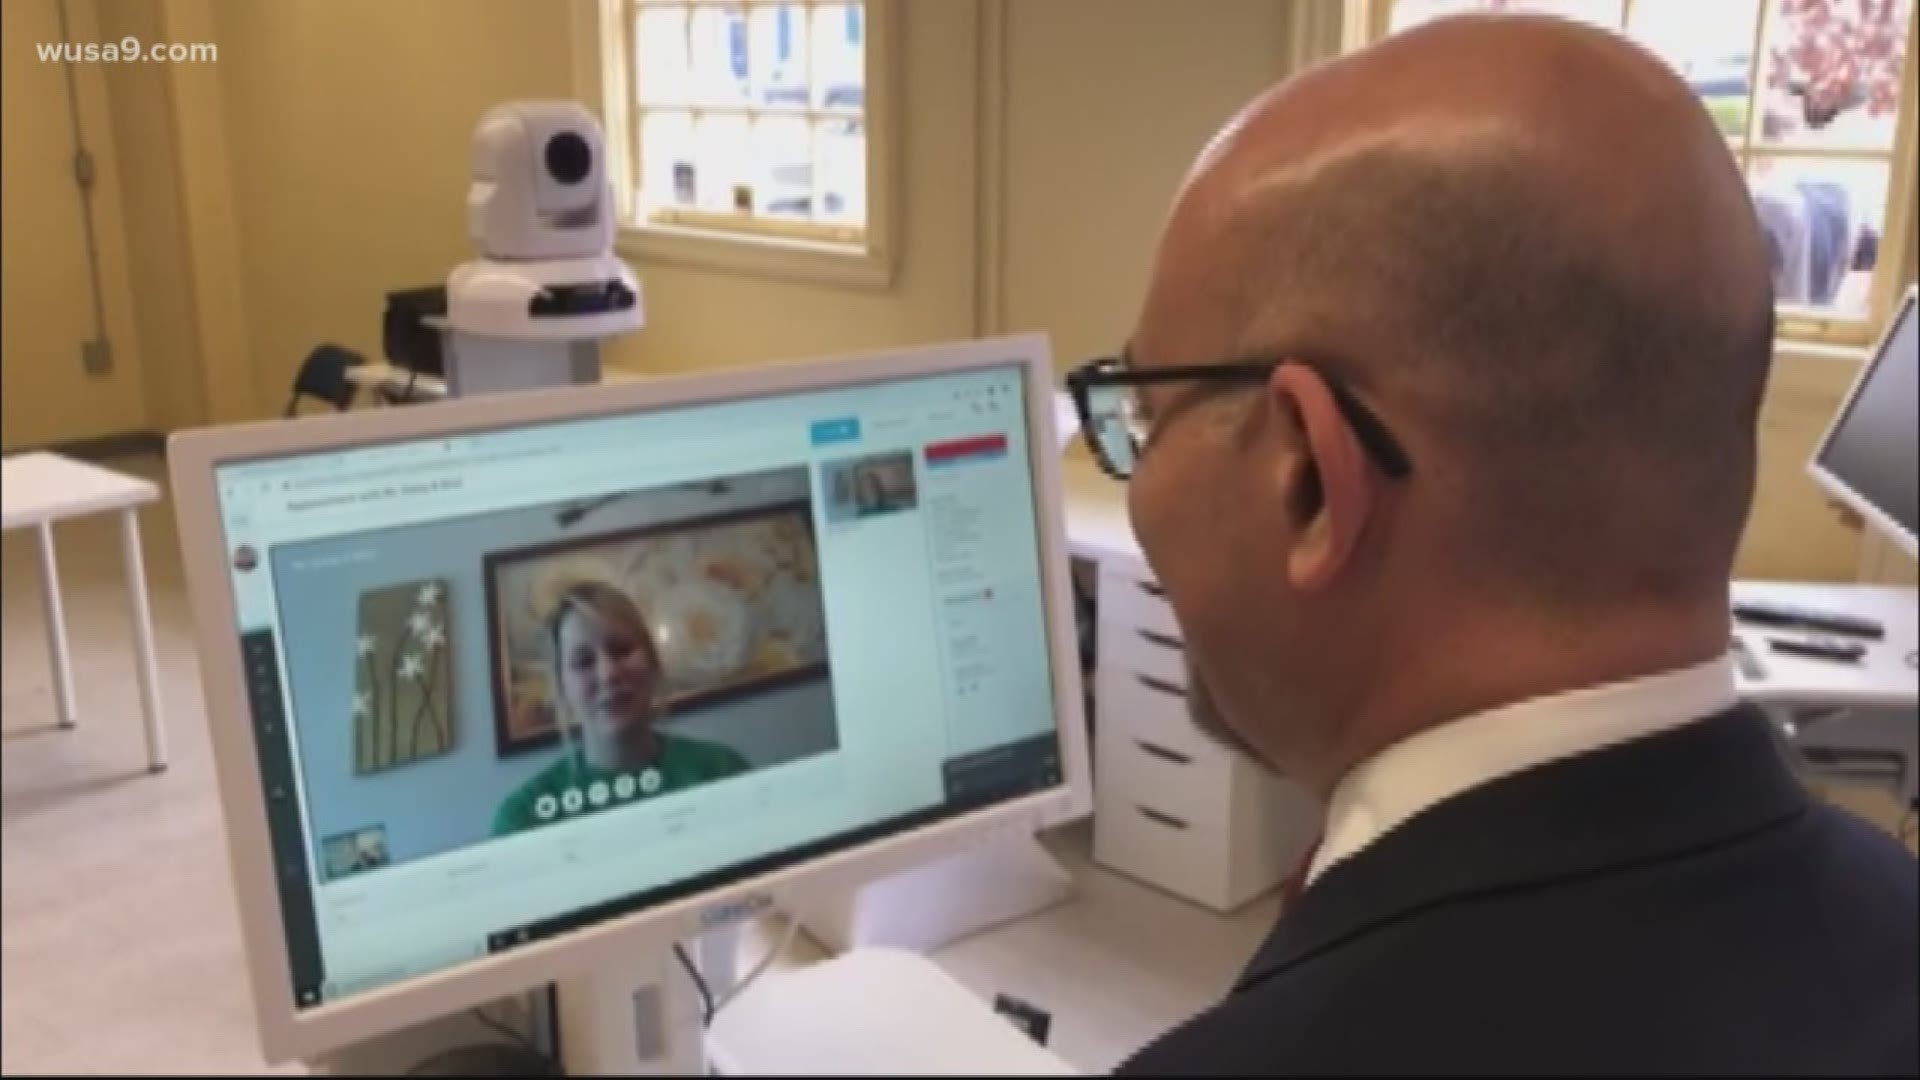 There's been a spike in the telehealth appointments that allow patients to speak to a doctor face-to-face